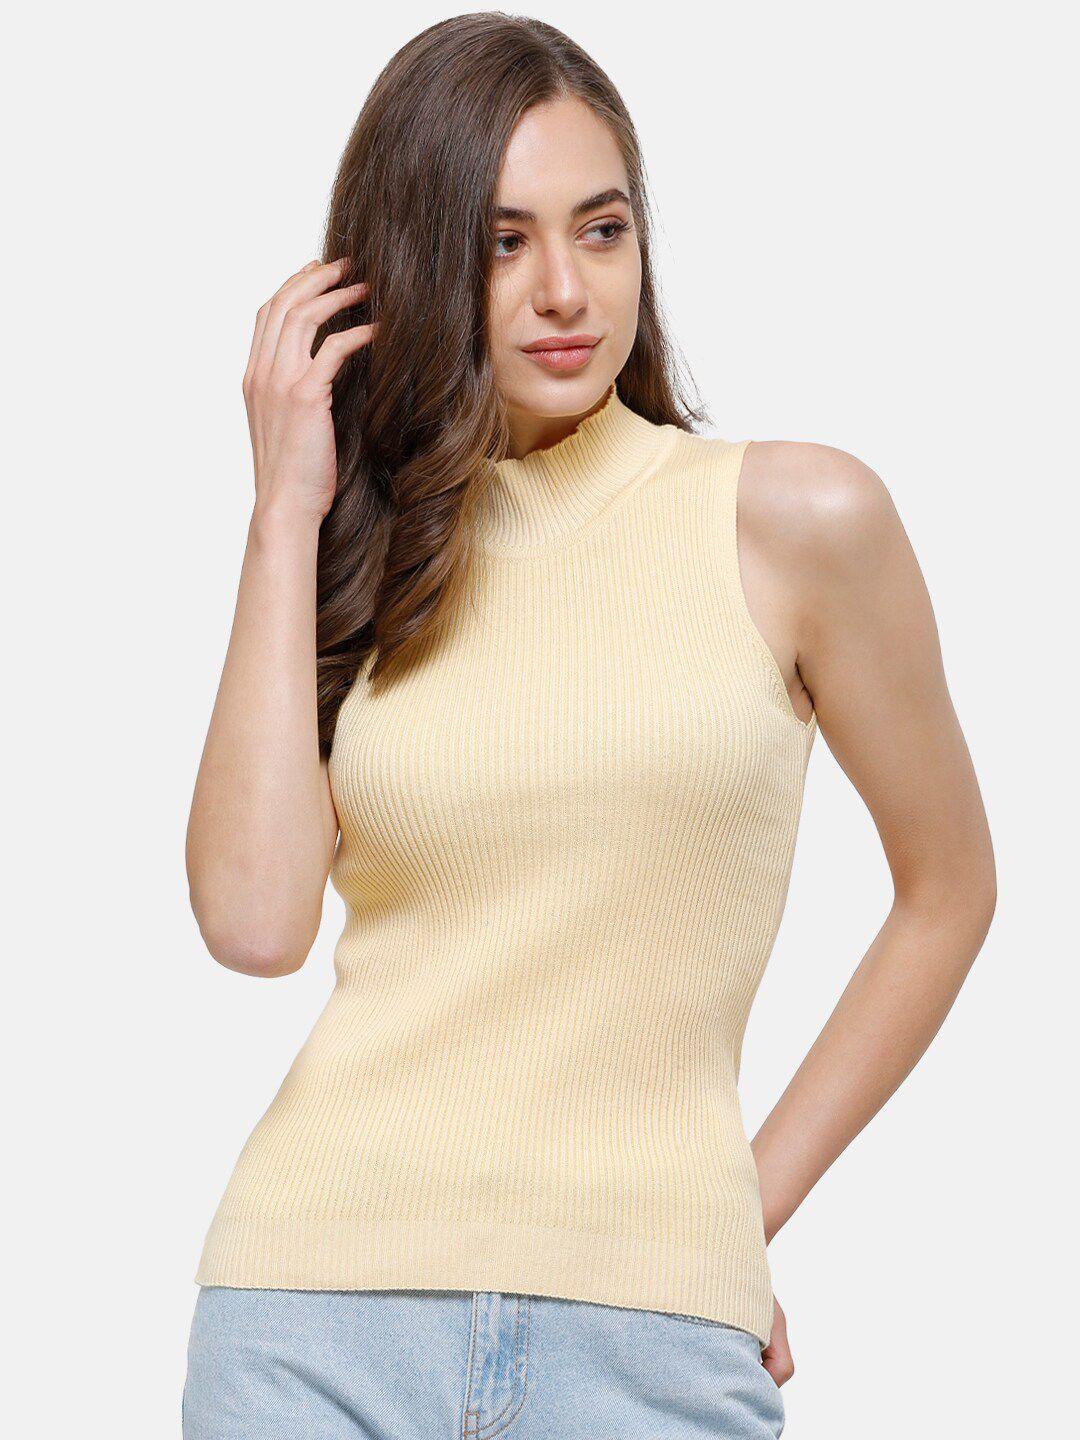 98 degree north women yellow striped ribbed pullover